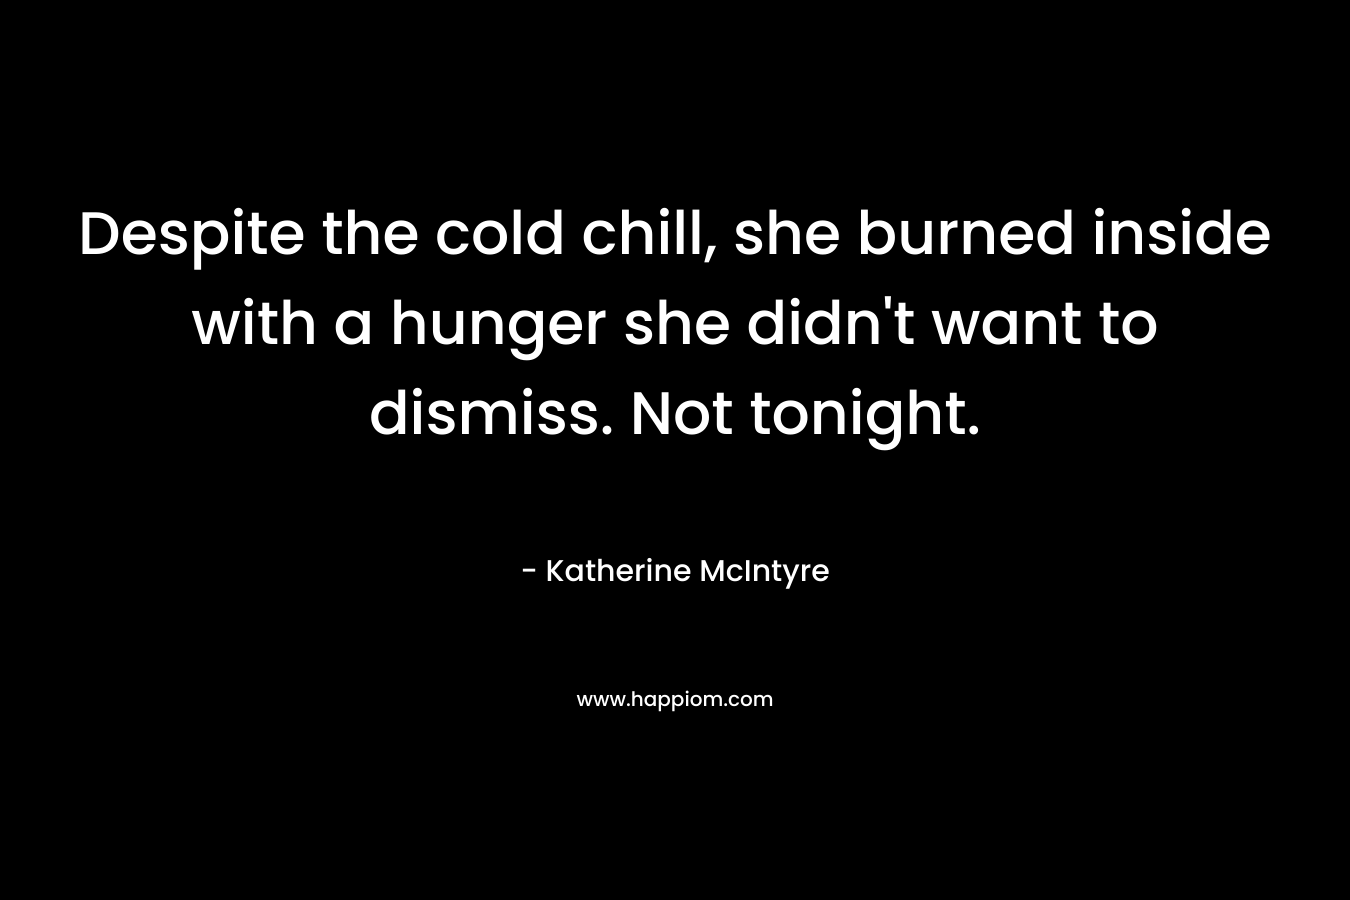 Despite the cold chill, she burned inside with a hunger she didn't want to dismiss. Not tonight.